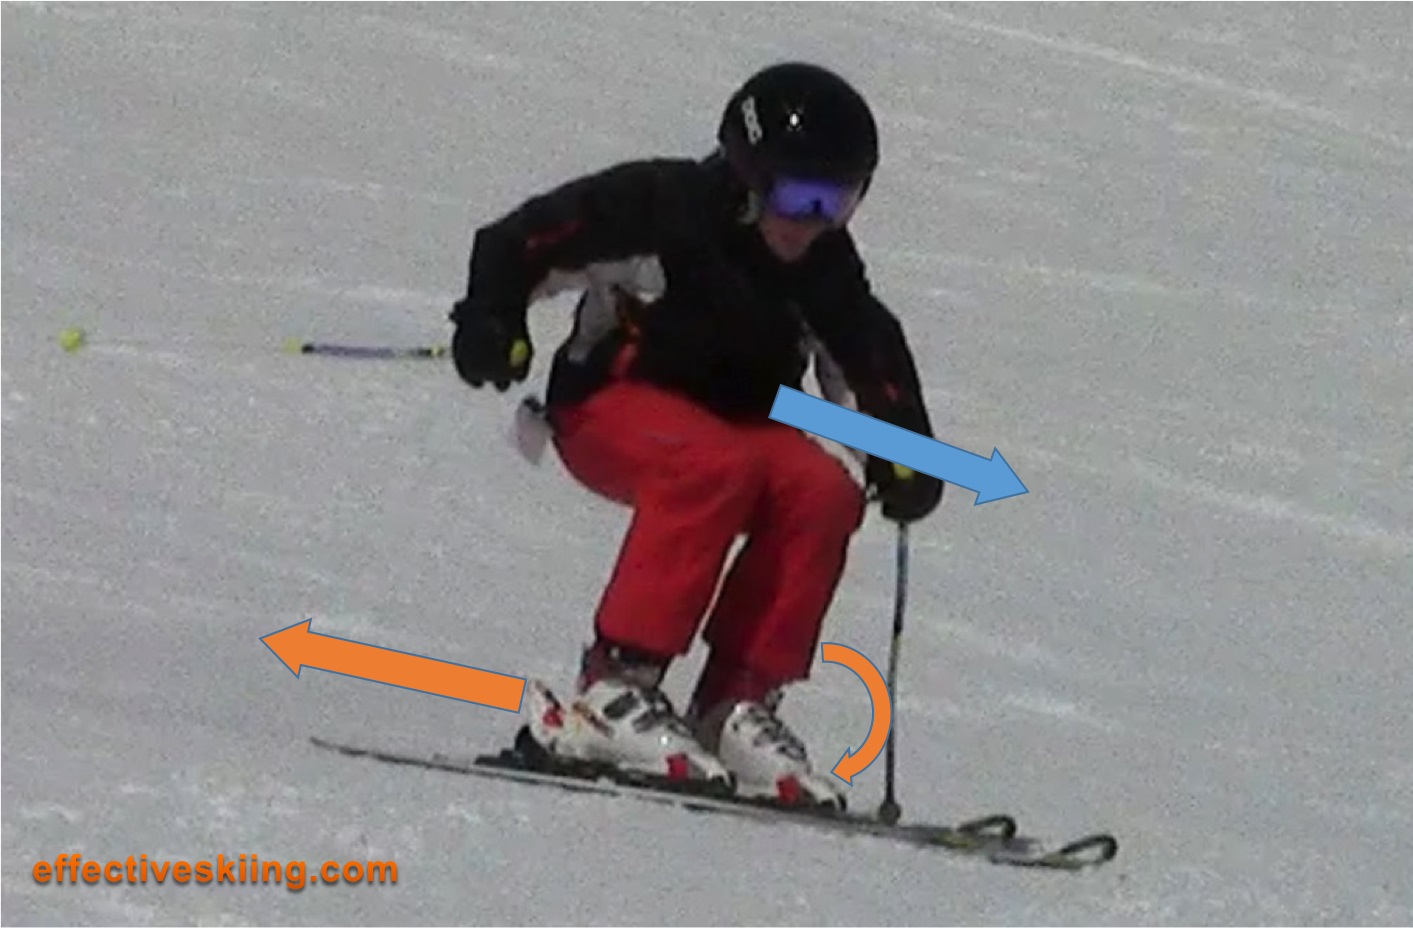 Flexed transition with pulling the skis back